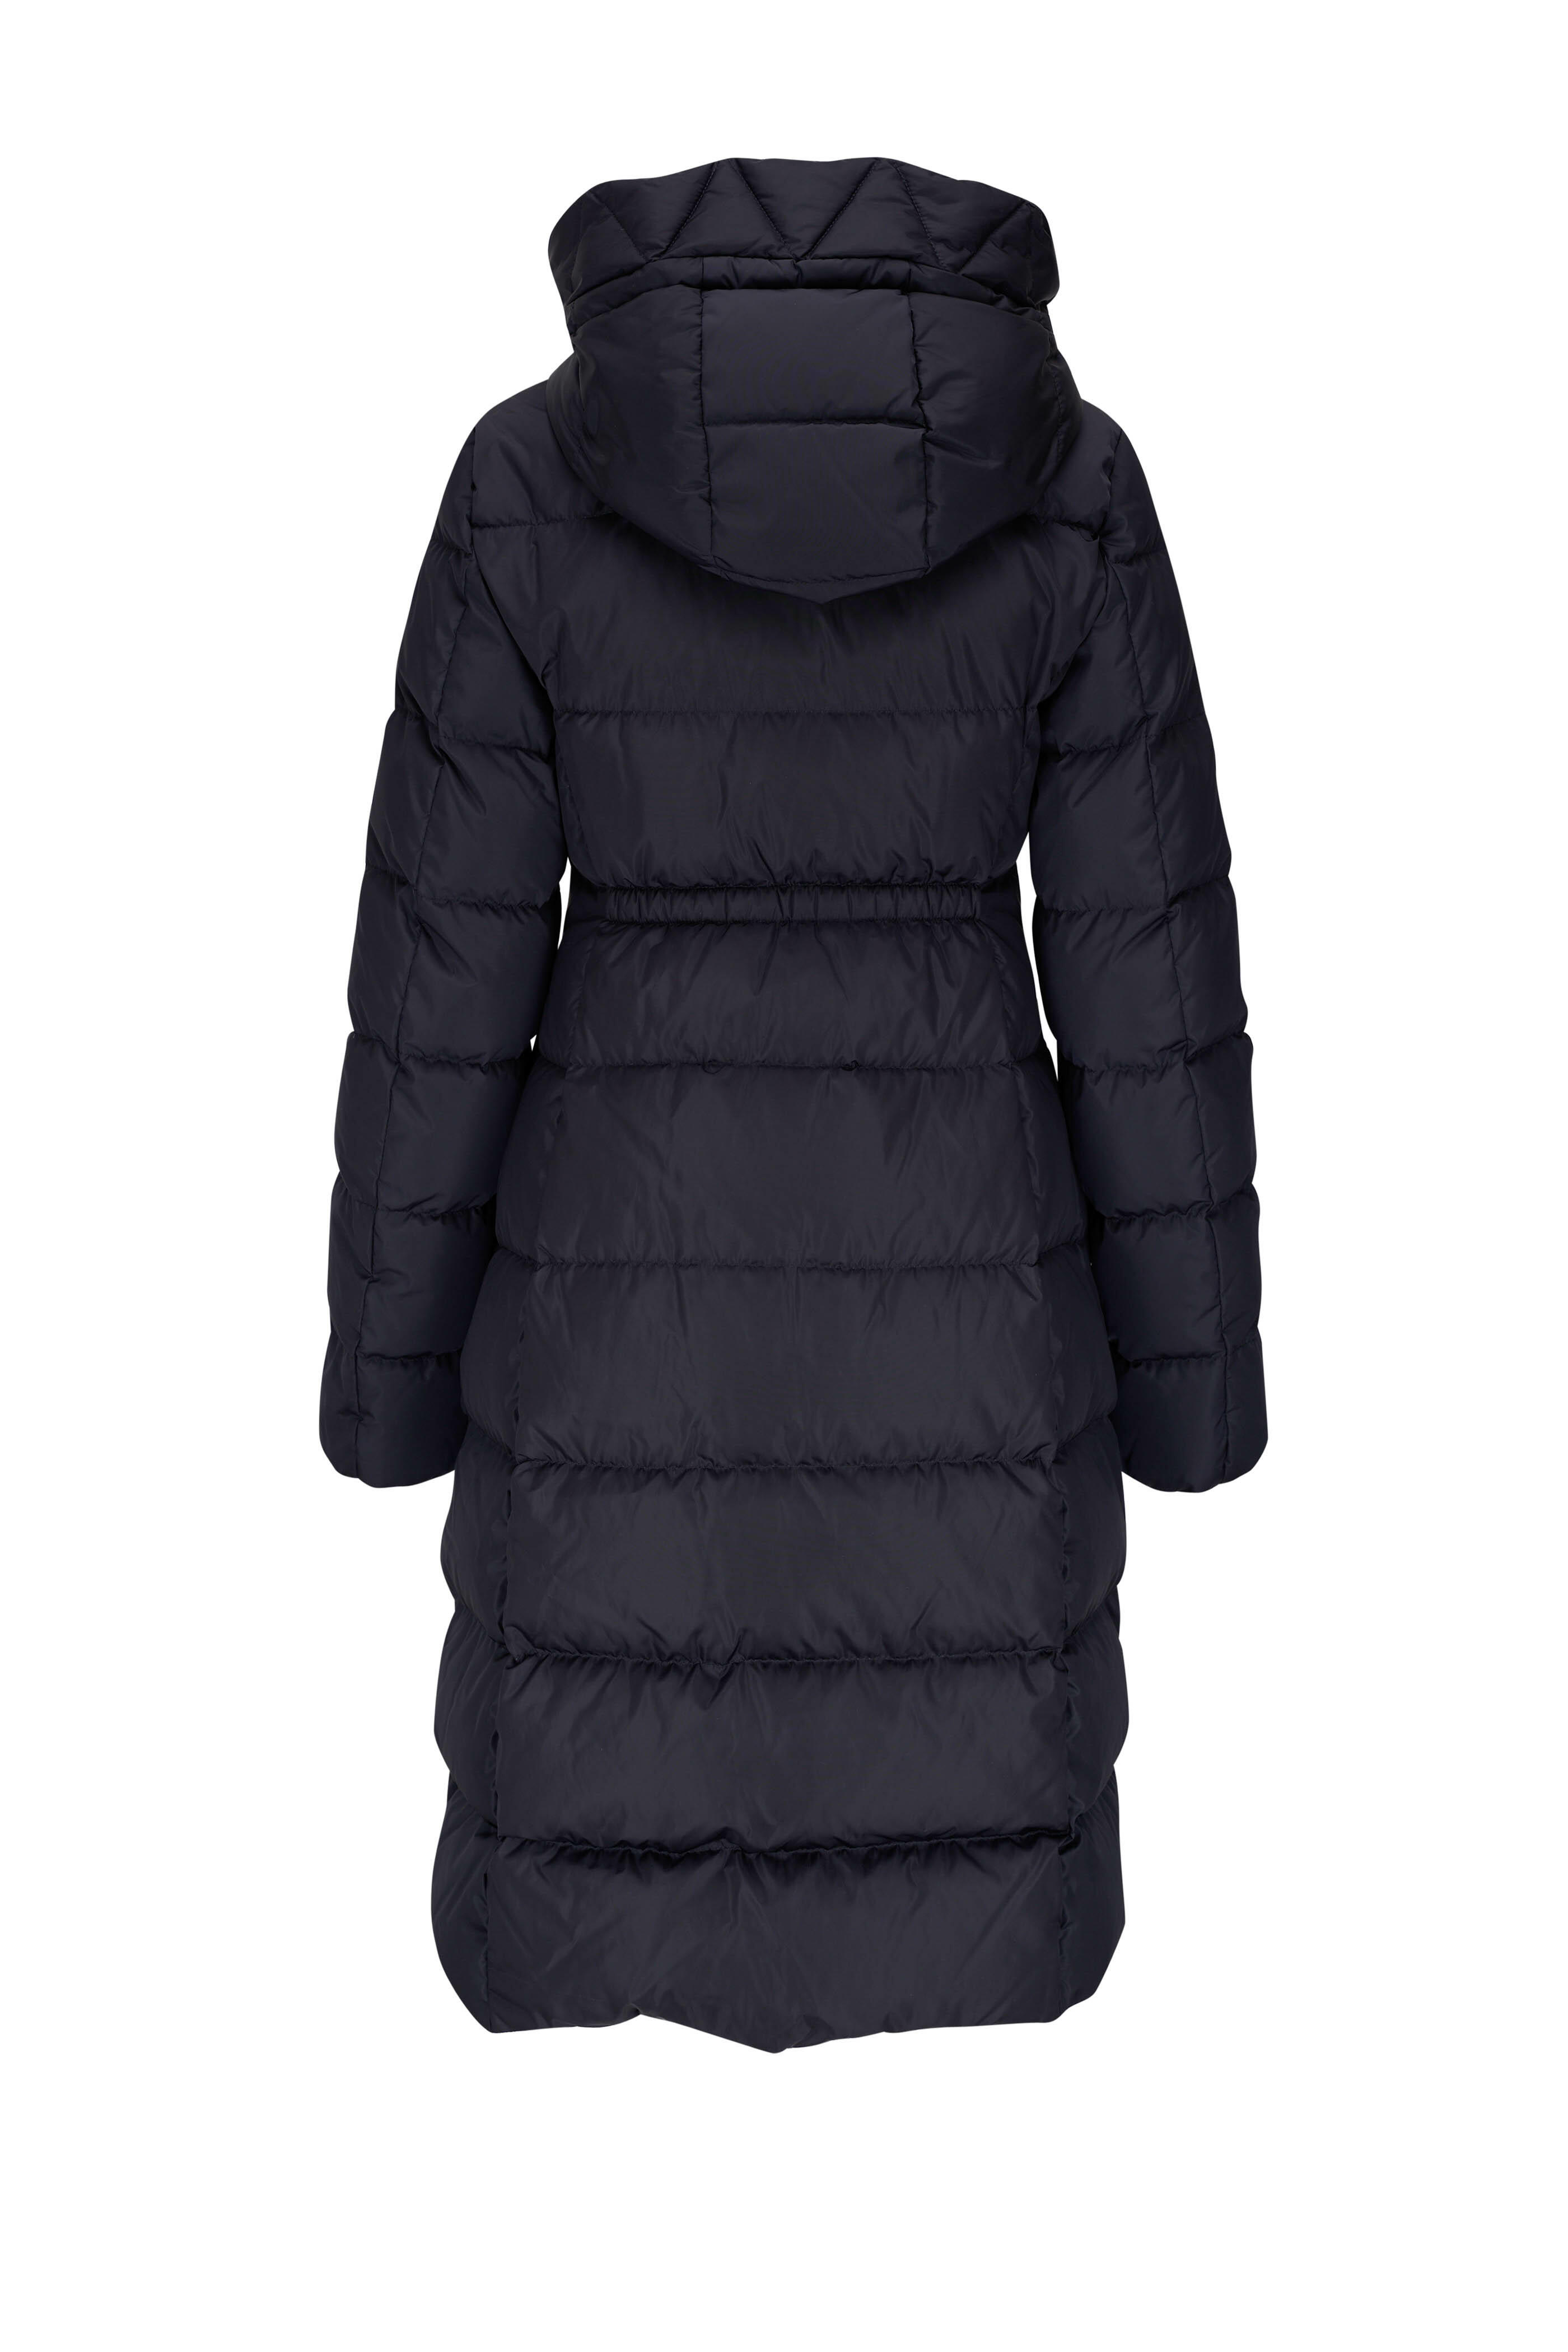 Moncler - Avocette Navy Blue Down Coat | Mitchell Stores